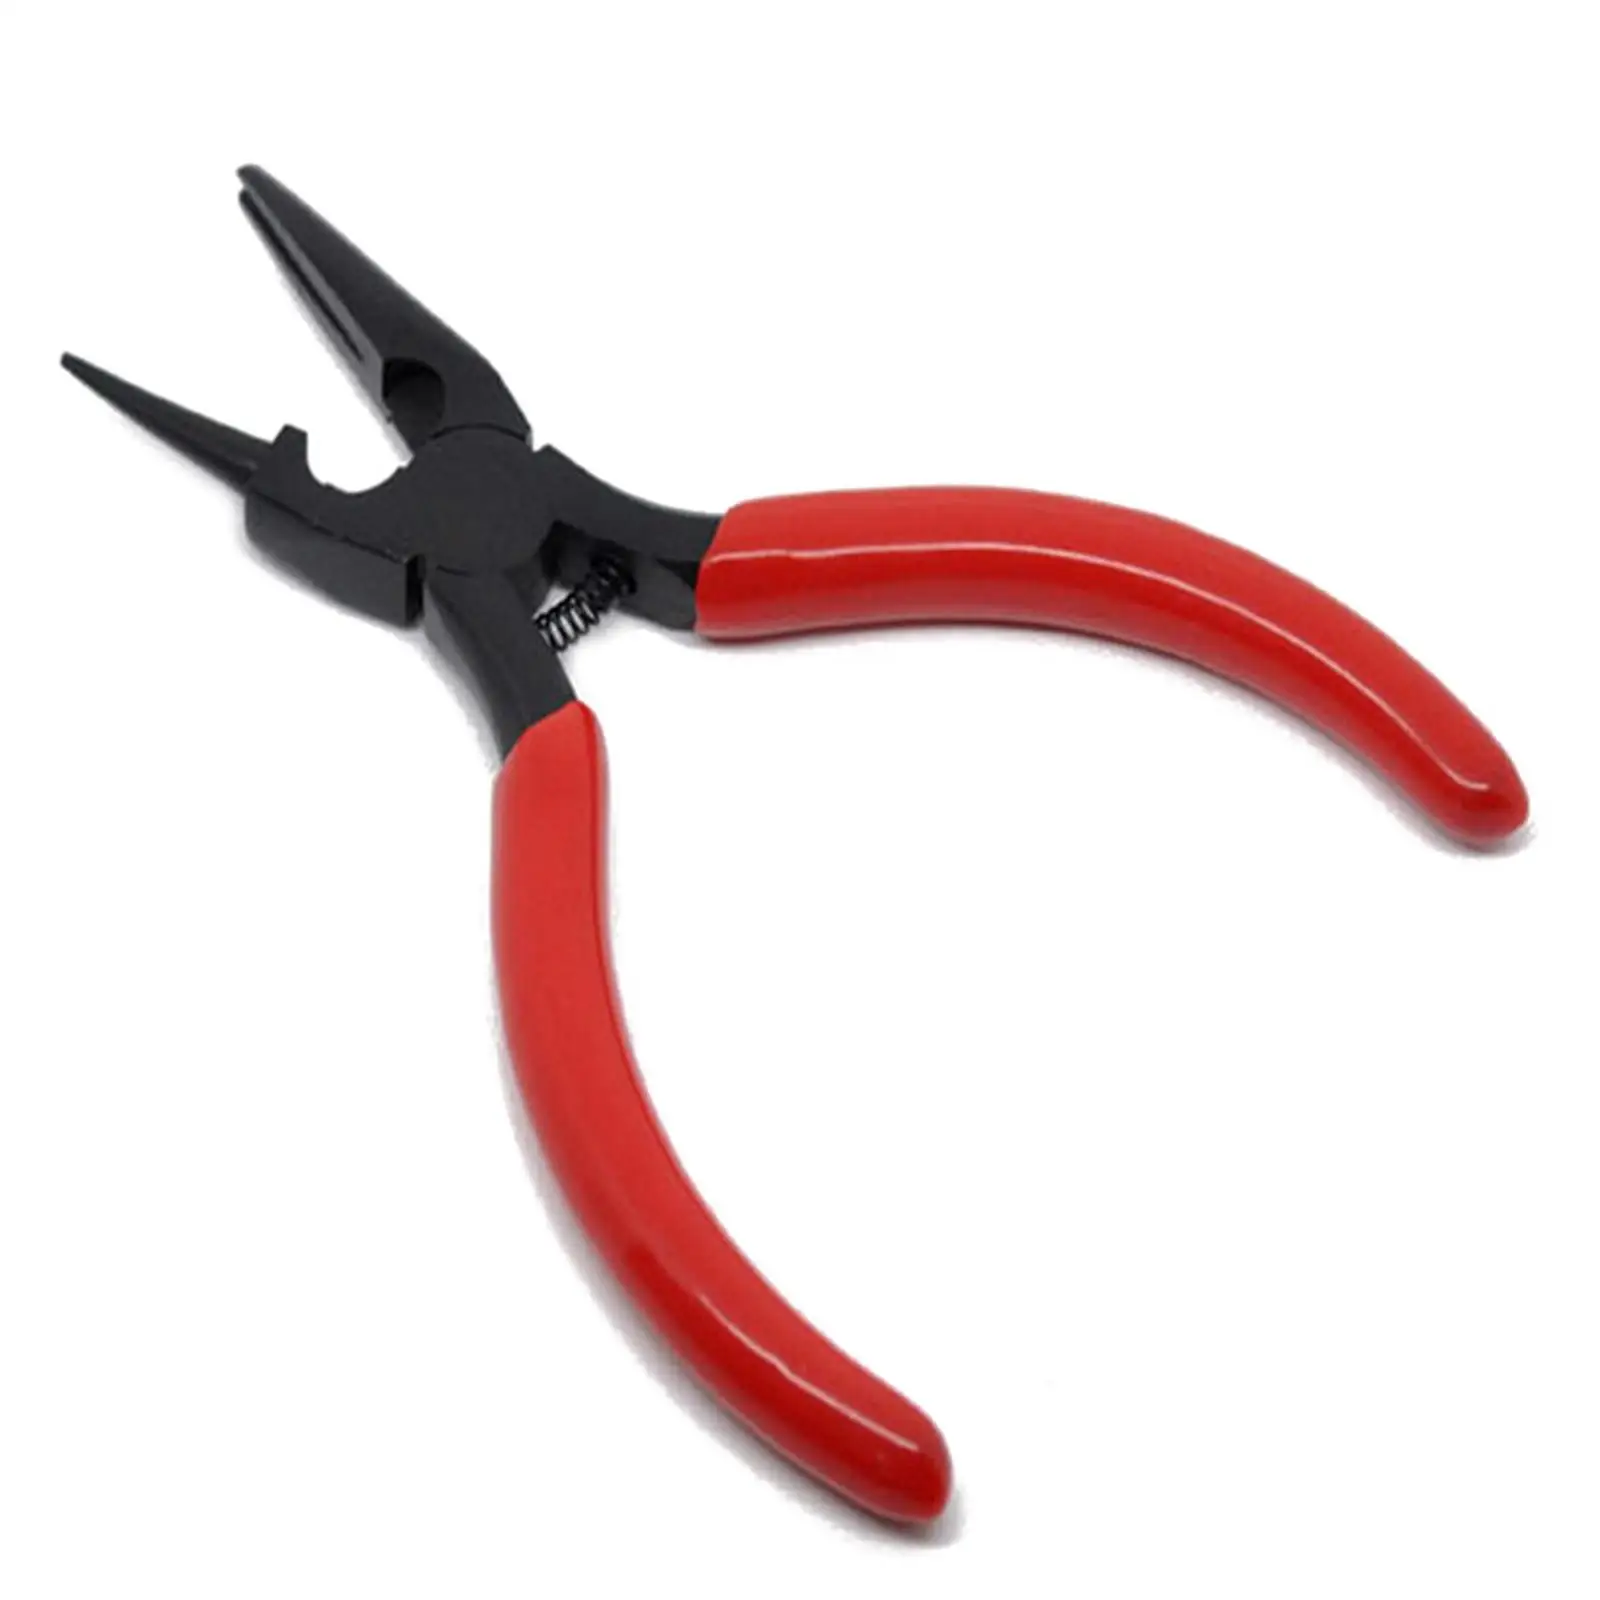 Portable Sharp Nose Pliers Repair Tools Jewelry Making Pliers for Jump Ring Forming